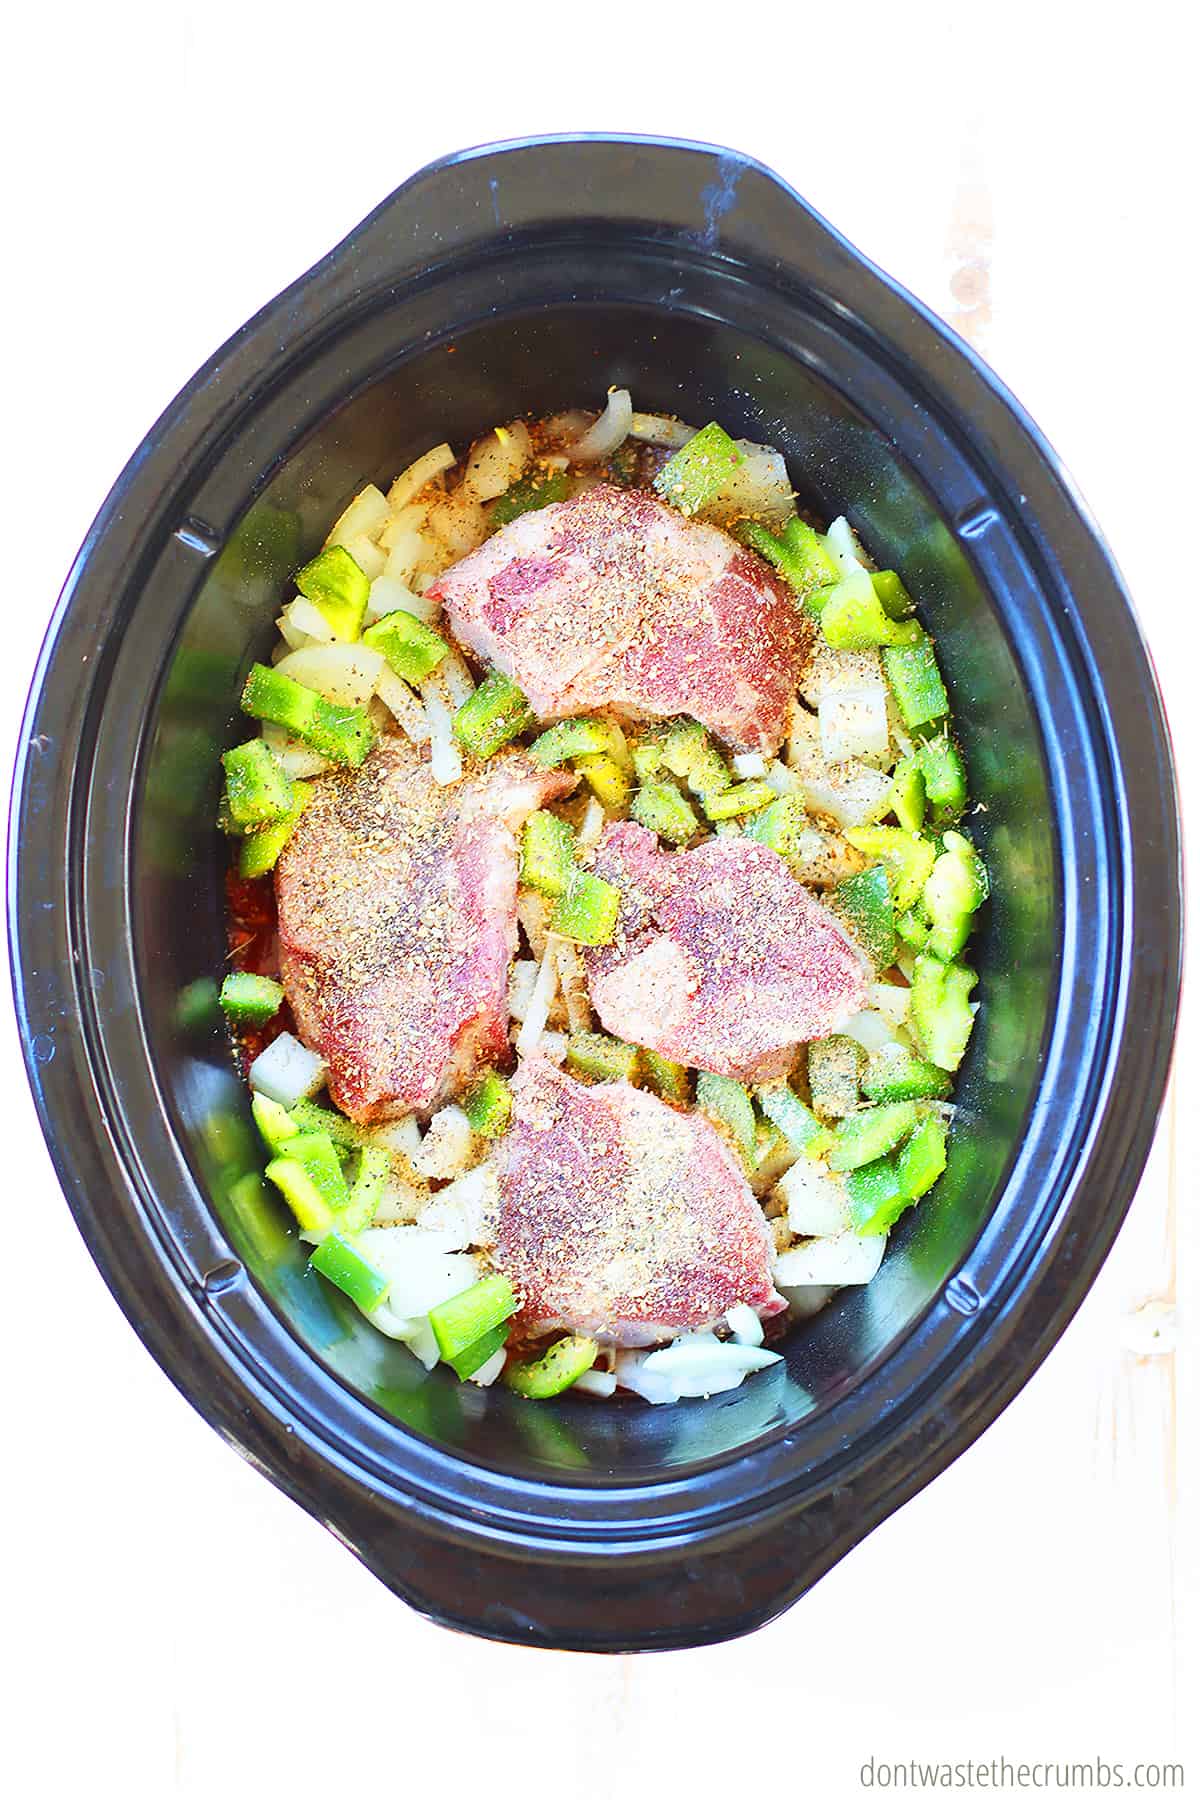 Transfer your seared meat (beef, pork or veal shank) to your crock pot insert and add your vegetables (onions, garlic, tomatoes, carrots) with your seasonings and herbs.